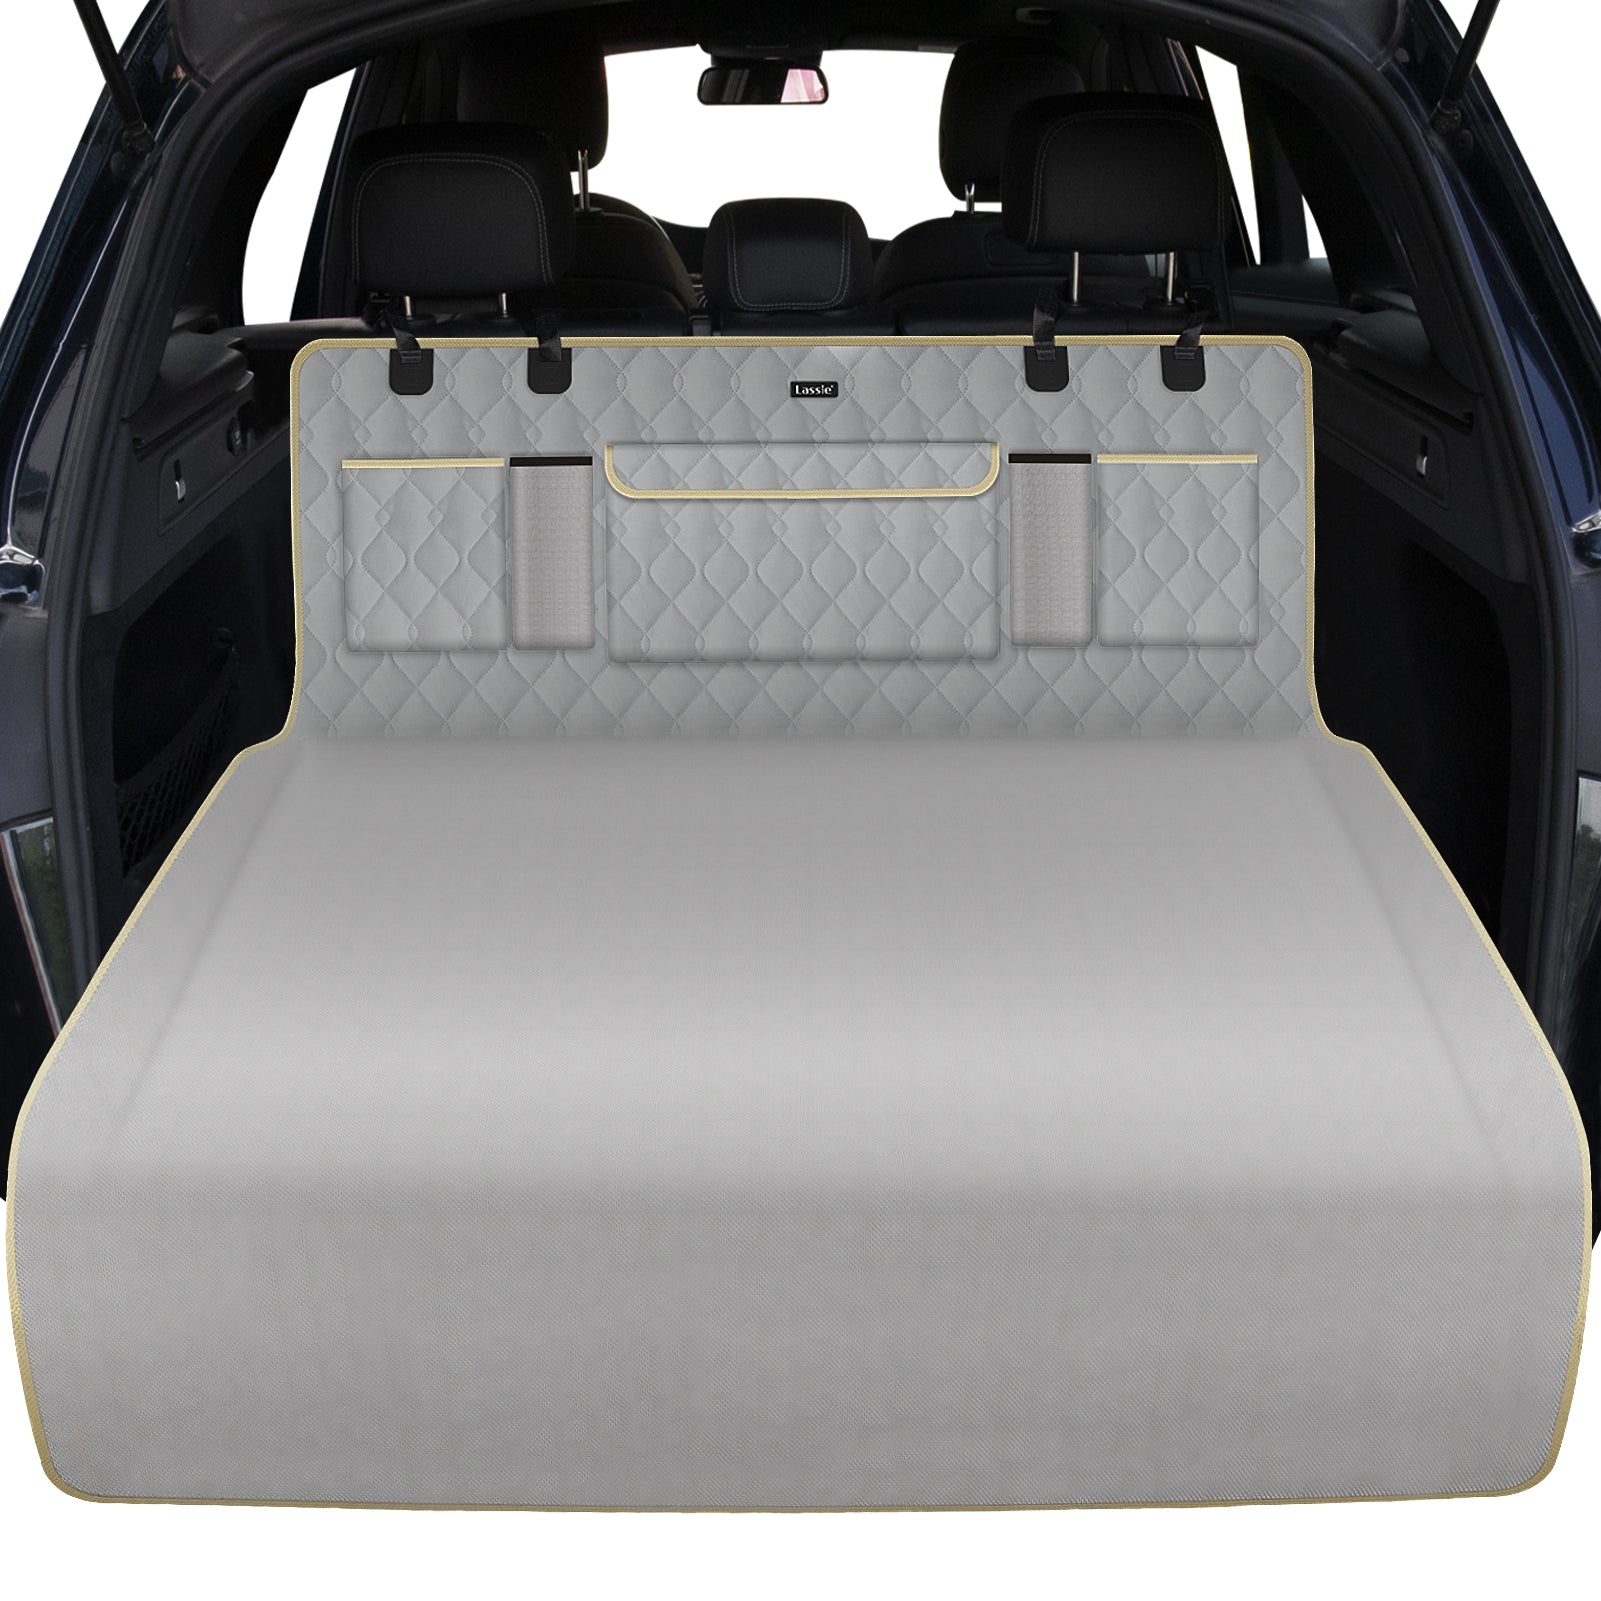  Active Pets Cotton SUV Cargo Liner for Dogs, Durable Non Slip  Vehicle Seat Cover, Protects Against Dirt & Fur, Pet Cargo Liner for SUV &  Trucks, Large Size Trunk Cover for